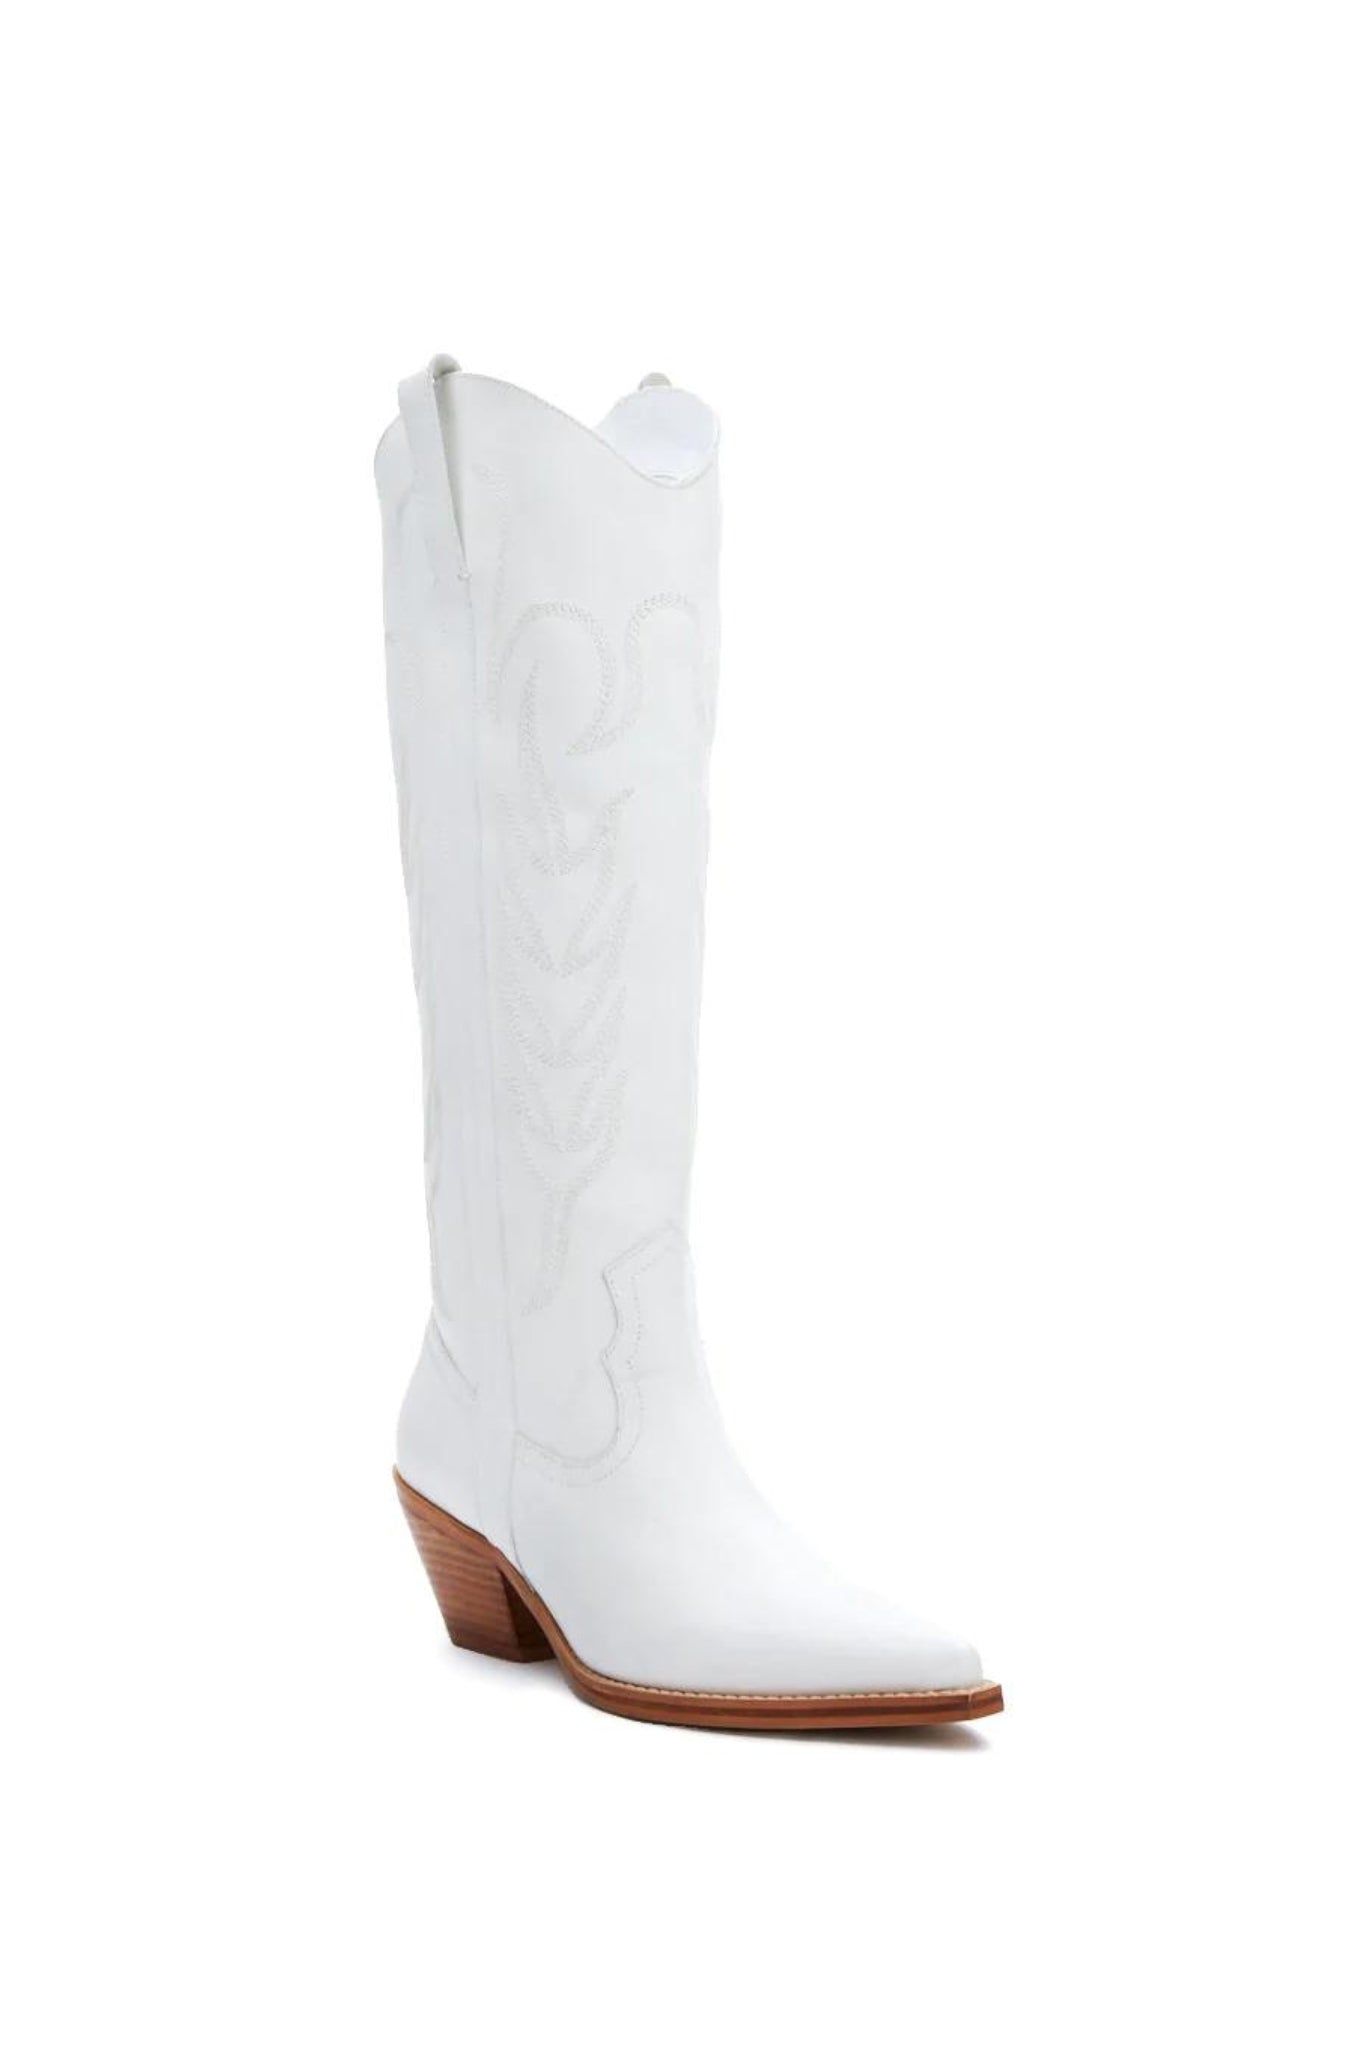 View 3 of Matisse Agency Cowboy Boot, a Shoes from Larrea Cove. Detail: .